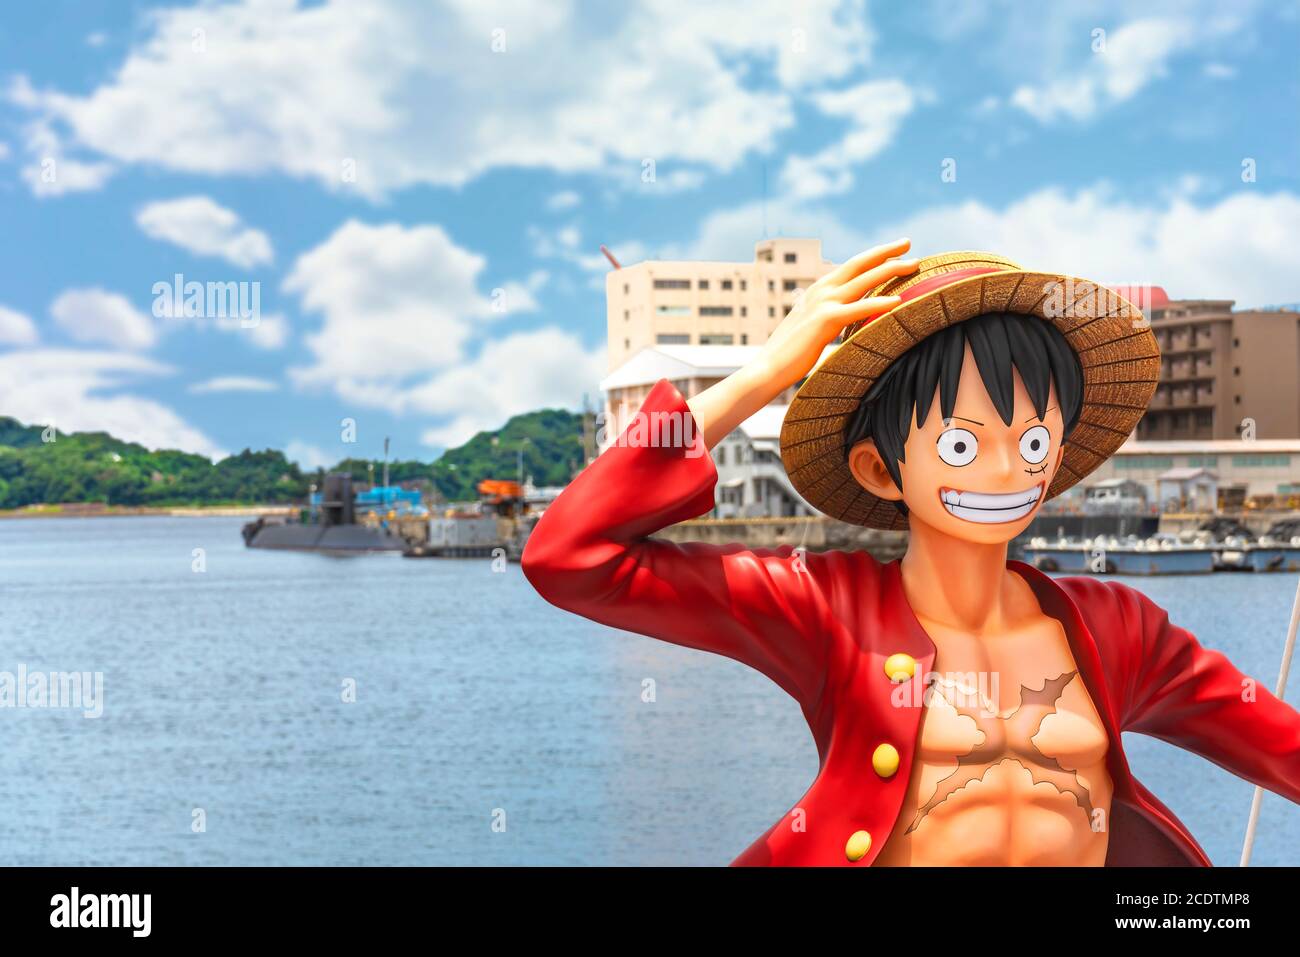 Kanagawa Japan July 19 Close Up On The Bust Of The Real Size Figurine Of The Hero Monkey D Luffy From The Manga One Piece By Eiichiro Oda On Stock Photo Alamy